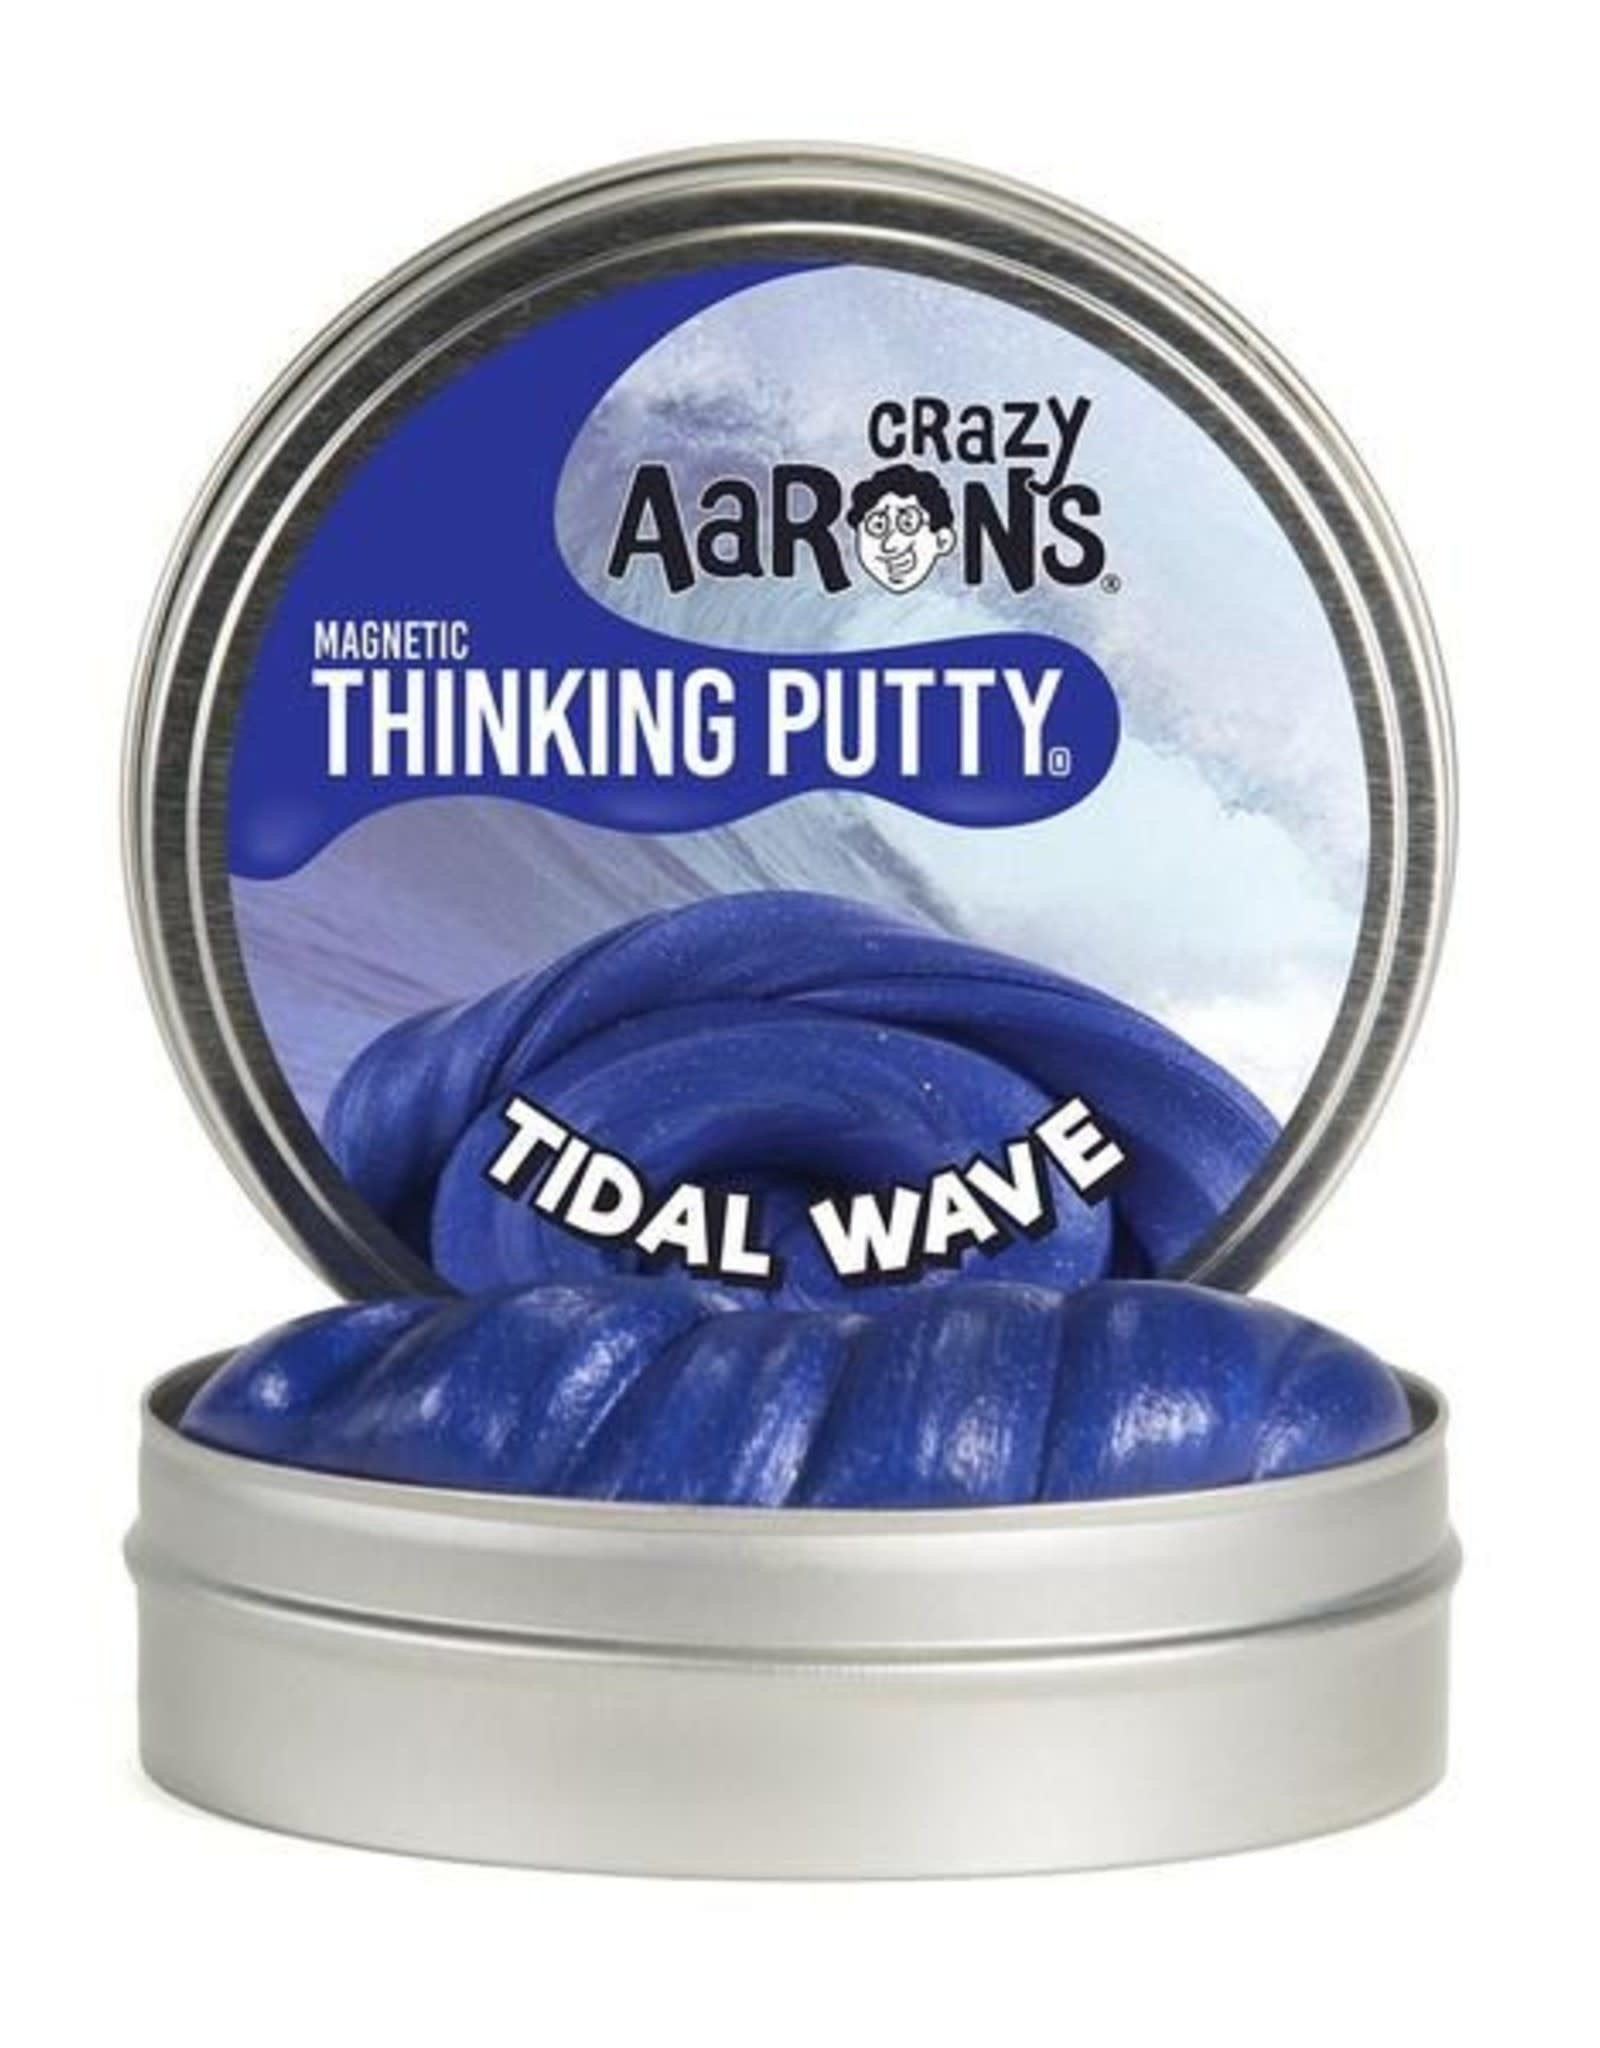 4" Tidal Wave Putty